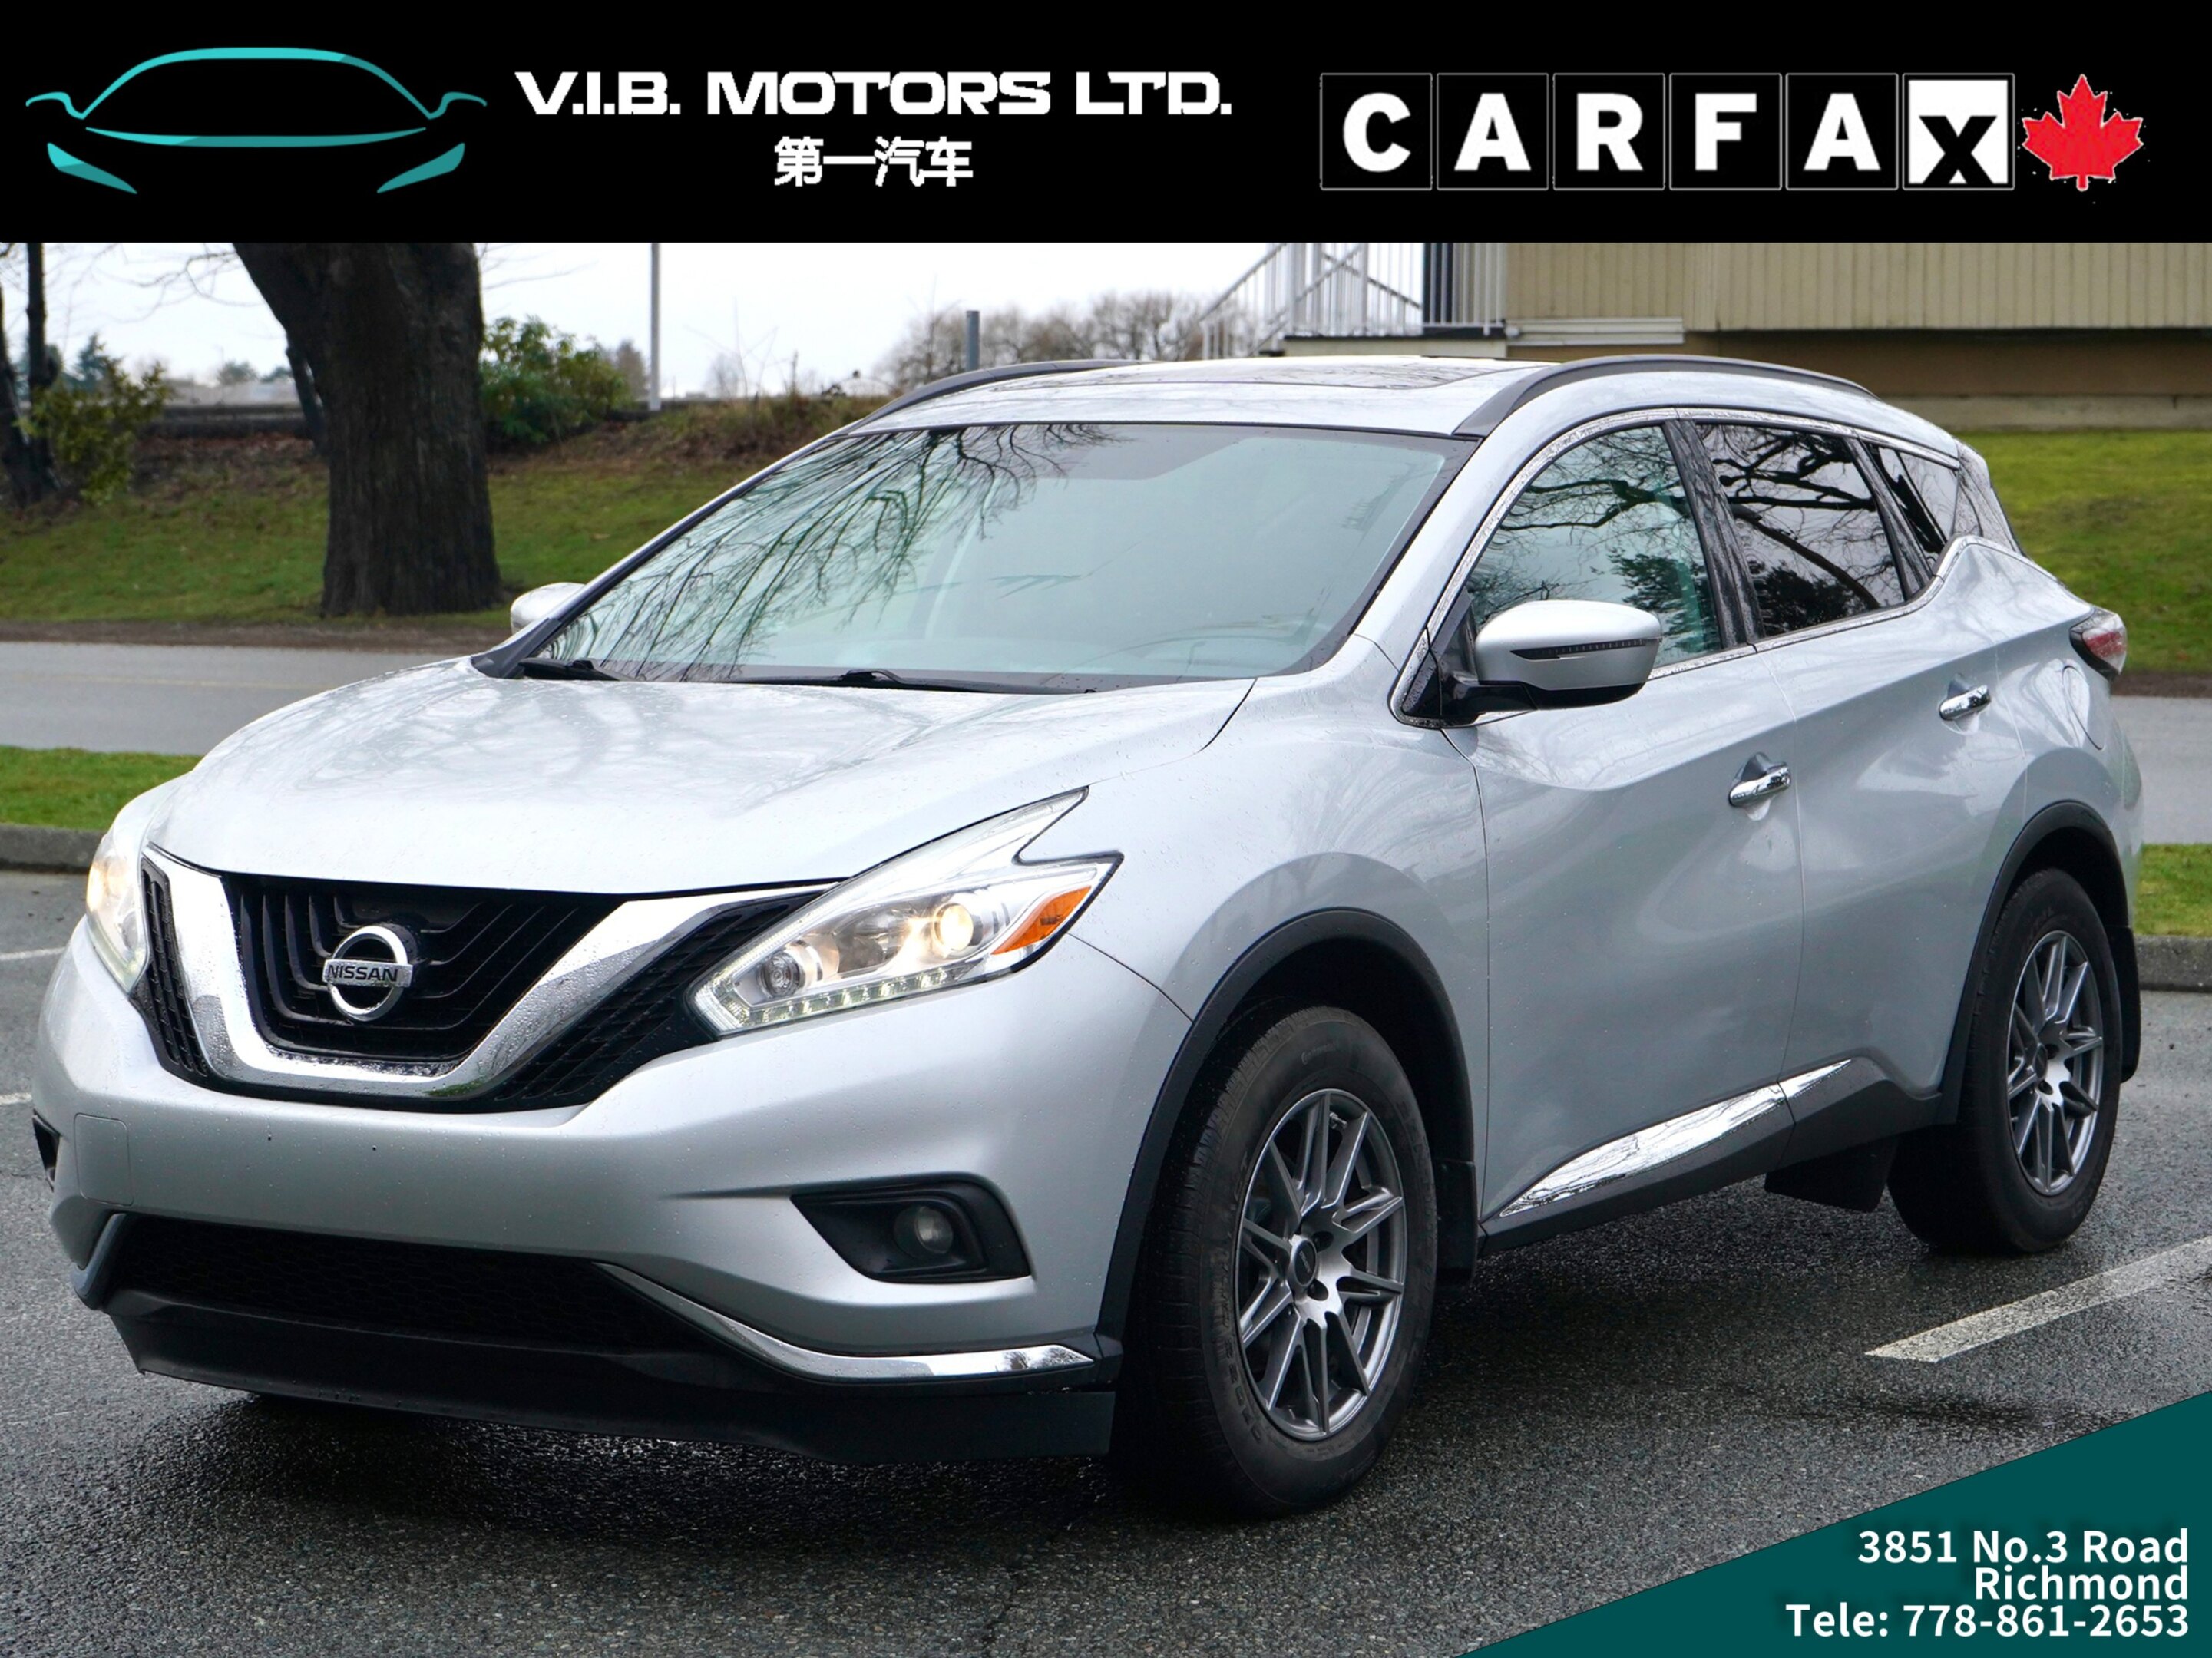 2016 Nissan Murano AWD 4dr SV AWD/0 Accident/ Sunroof/